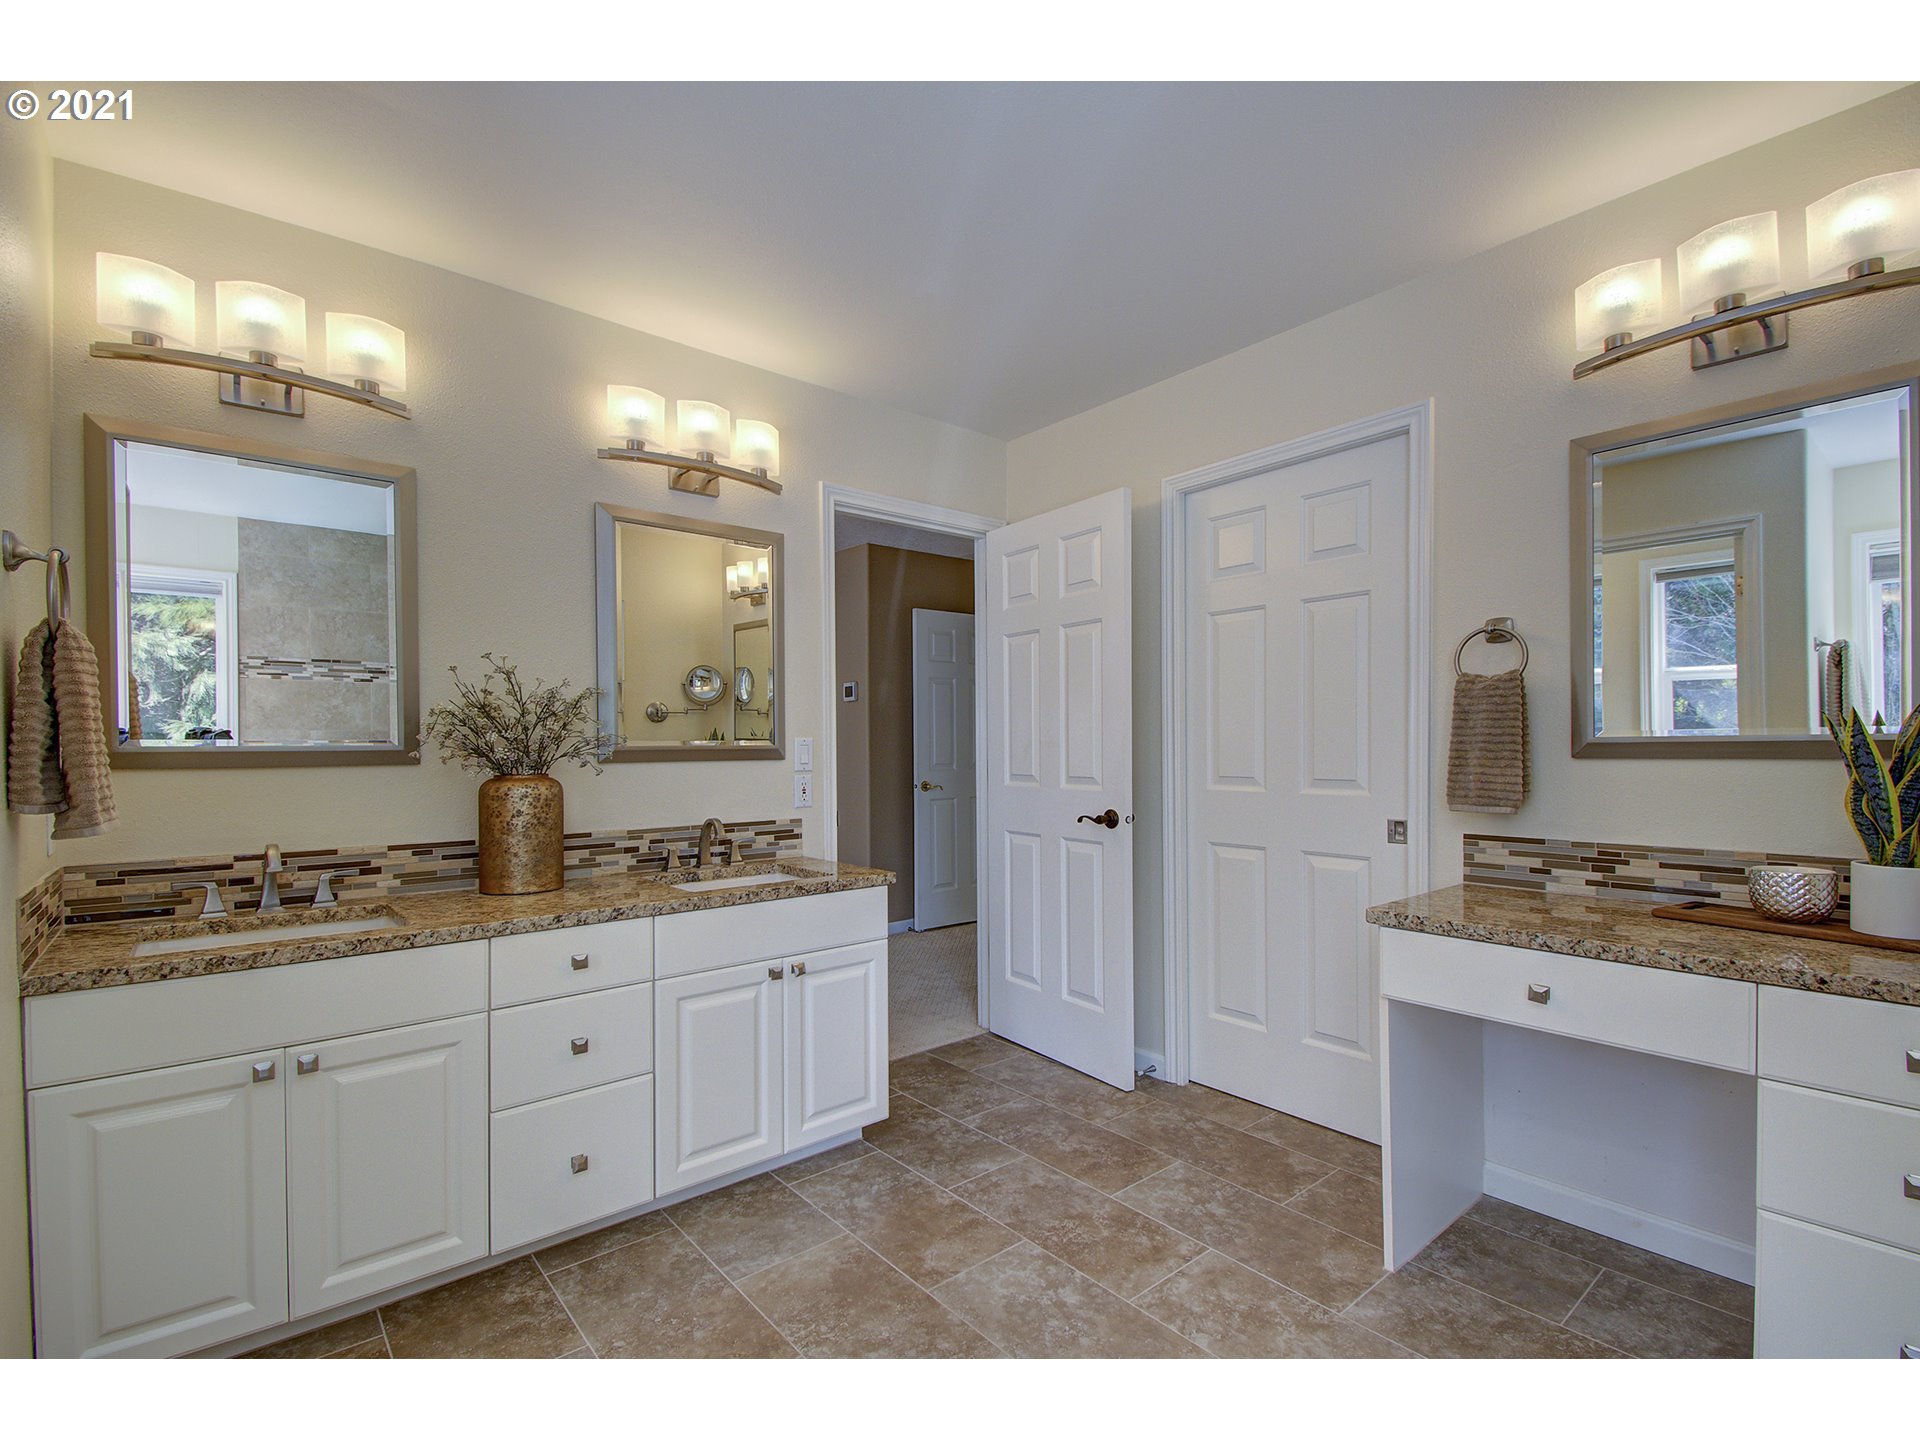 Bathroom, Attached-Double Sinks